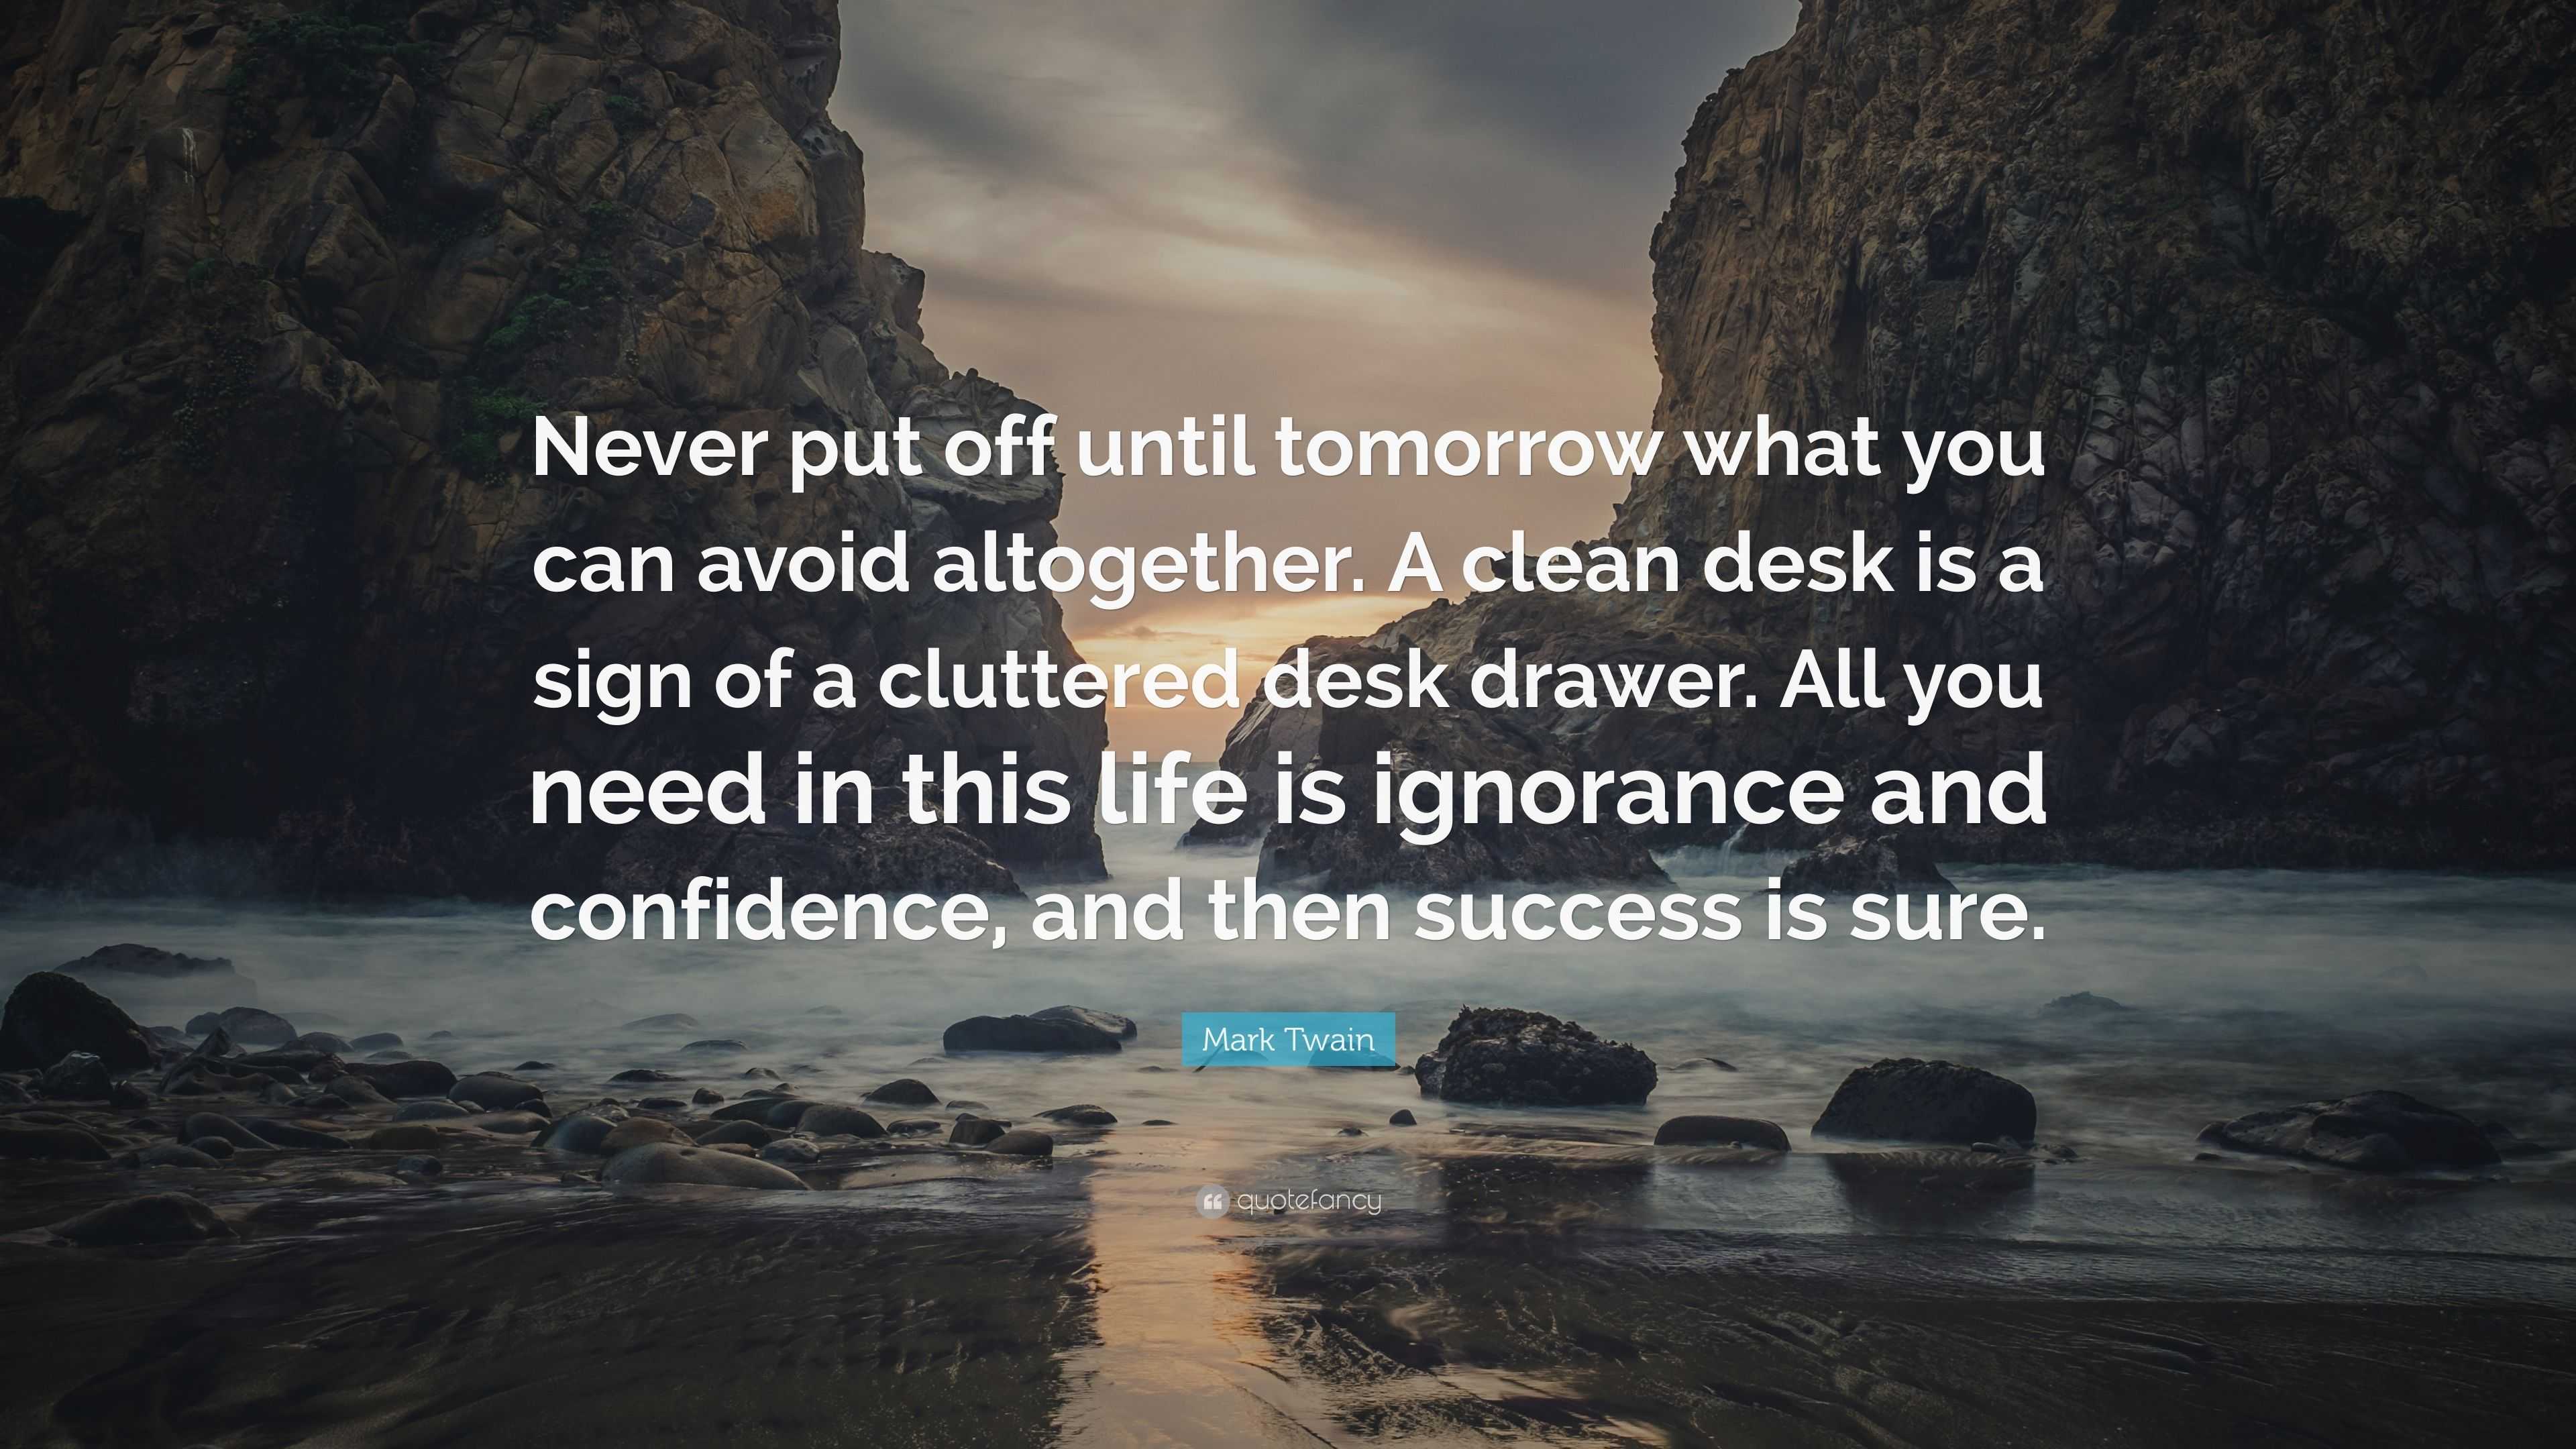 Mark Twain Quote: “Never put off until tomorrow what you can avoid  altogether. A clean desk is a sign of a cluttered desk drawer. All you n”